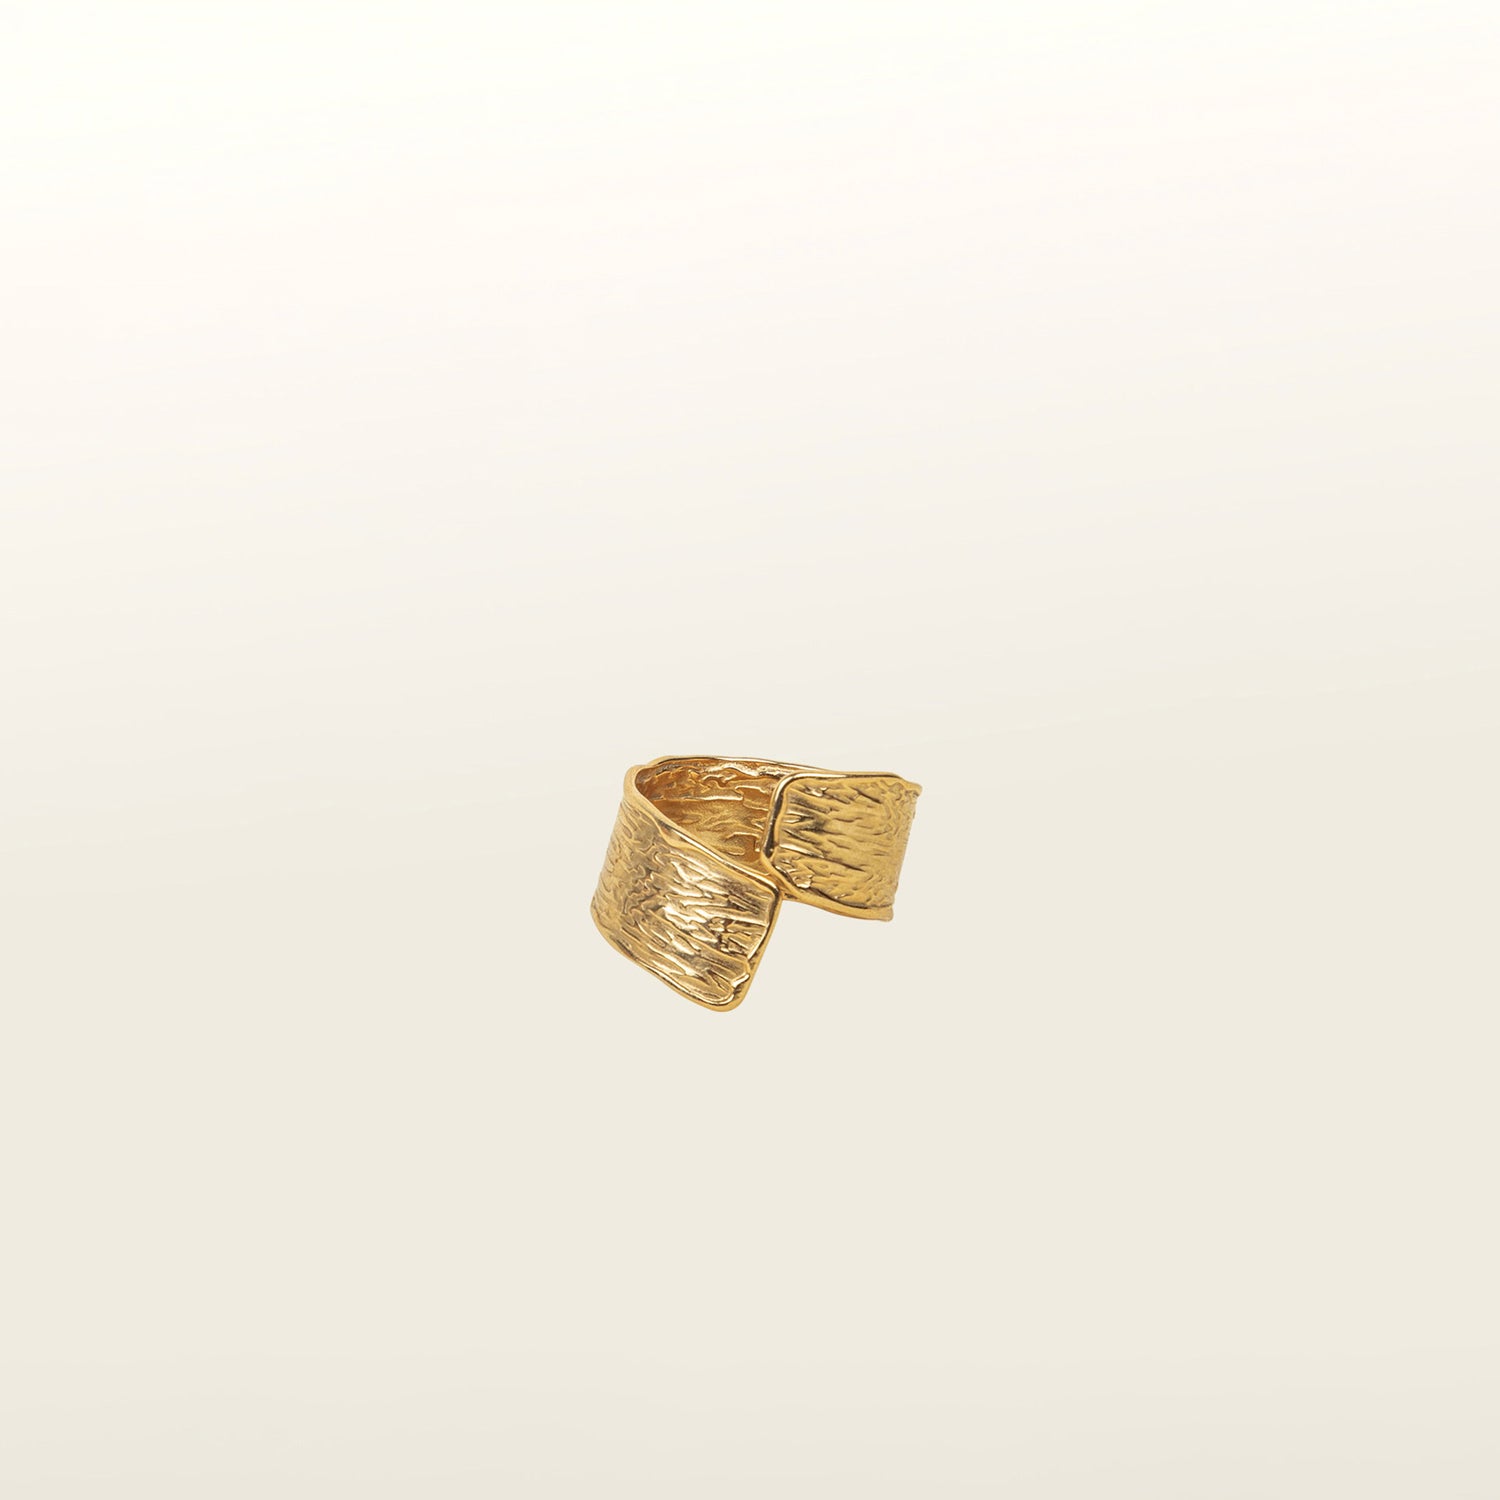 Image of the Textured Curl Ring in Gold is adjustable between sizes 7-10, crafted using 14K Gold Plated Stainless Steel for durability and resistance to tarnish, water, and lead, nickel, and cadmium. Please note that only one ring is included.